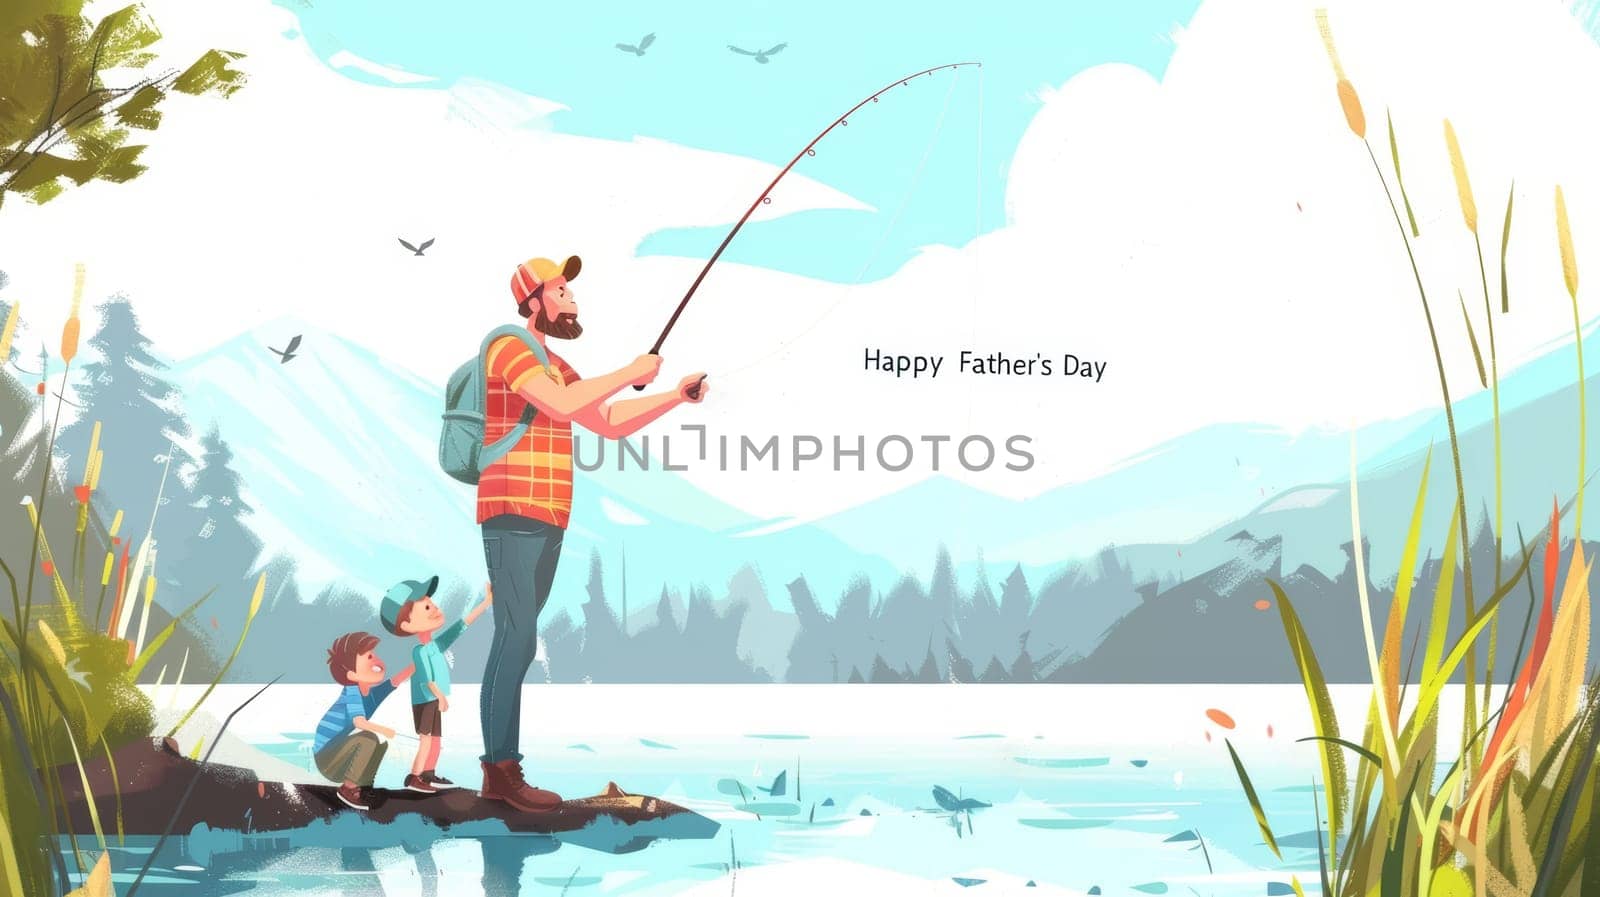 A peaceful illustration showcasing a father and his kids enjoying a fishing trip against a backdrop of a tranquil lake and mountains